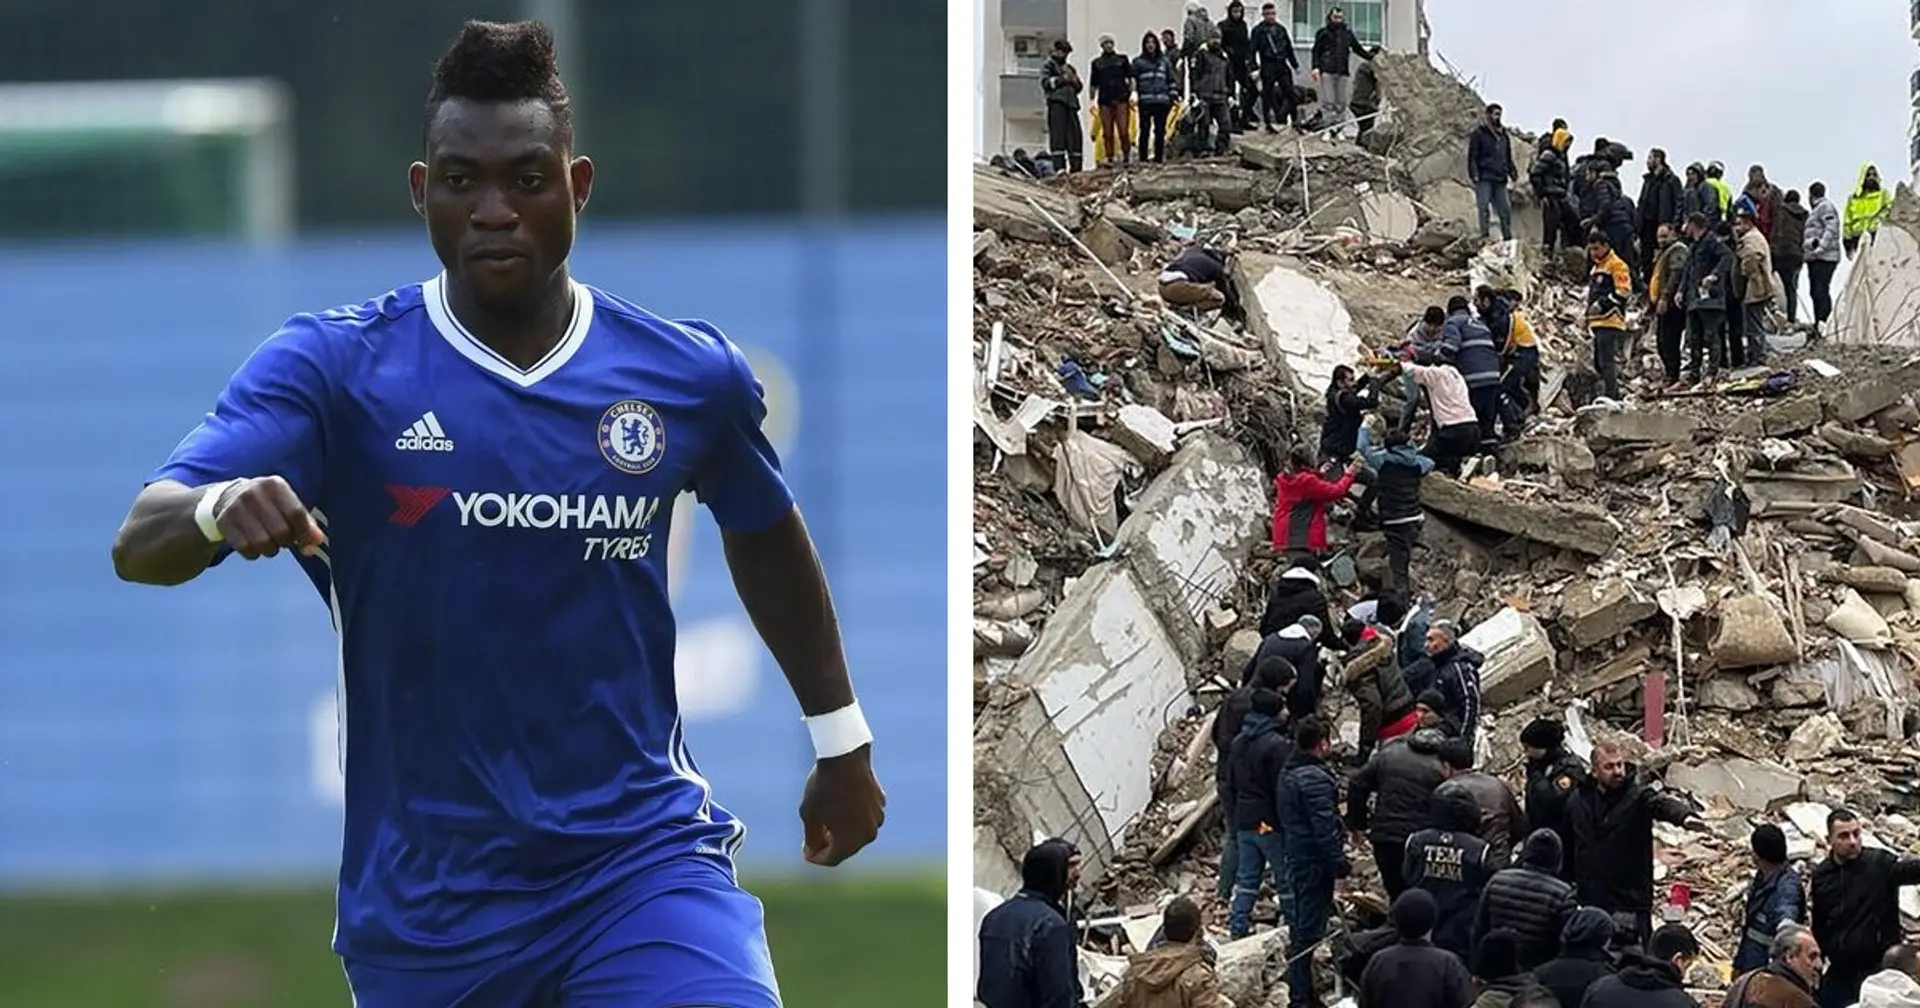 Former Chelsea winger Atsu reportedly 'trapped under rubble' as rescue team continue search for player